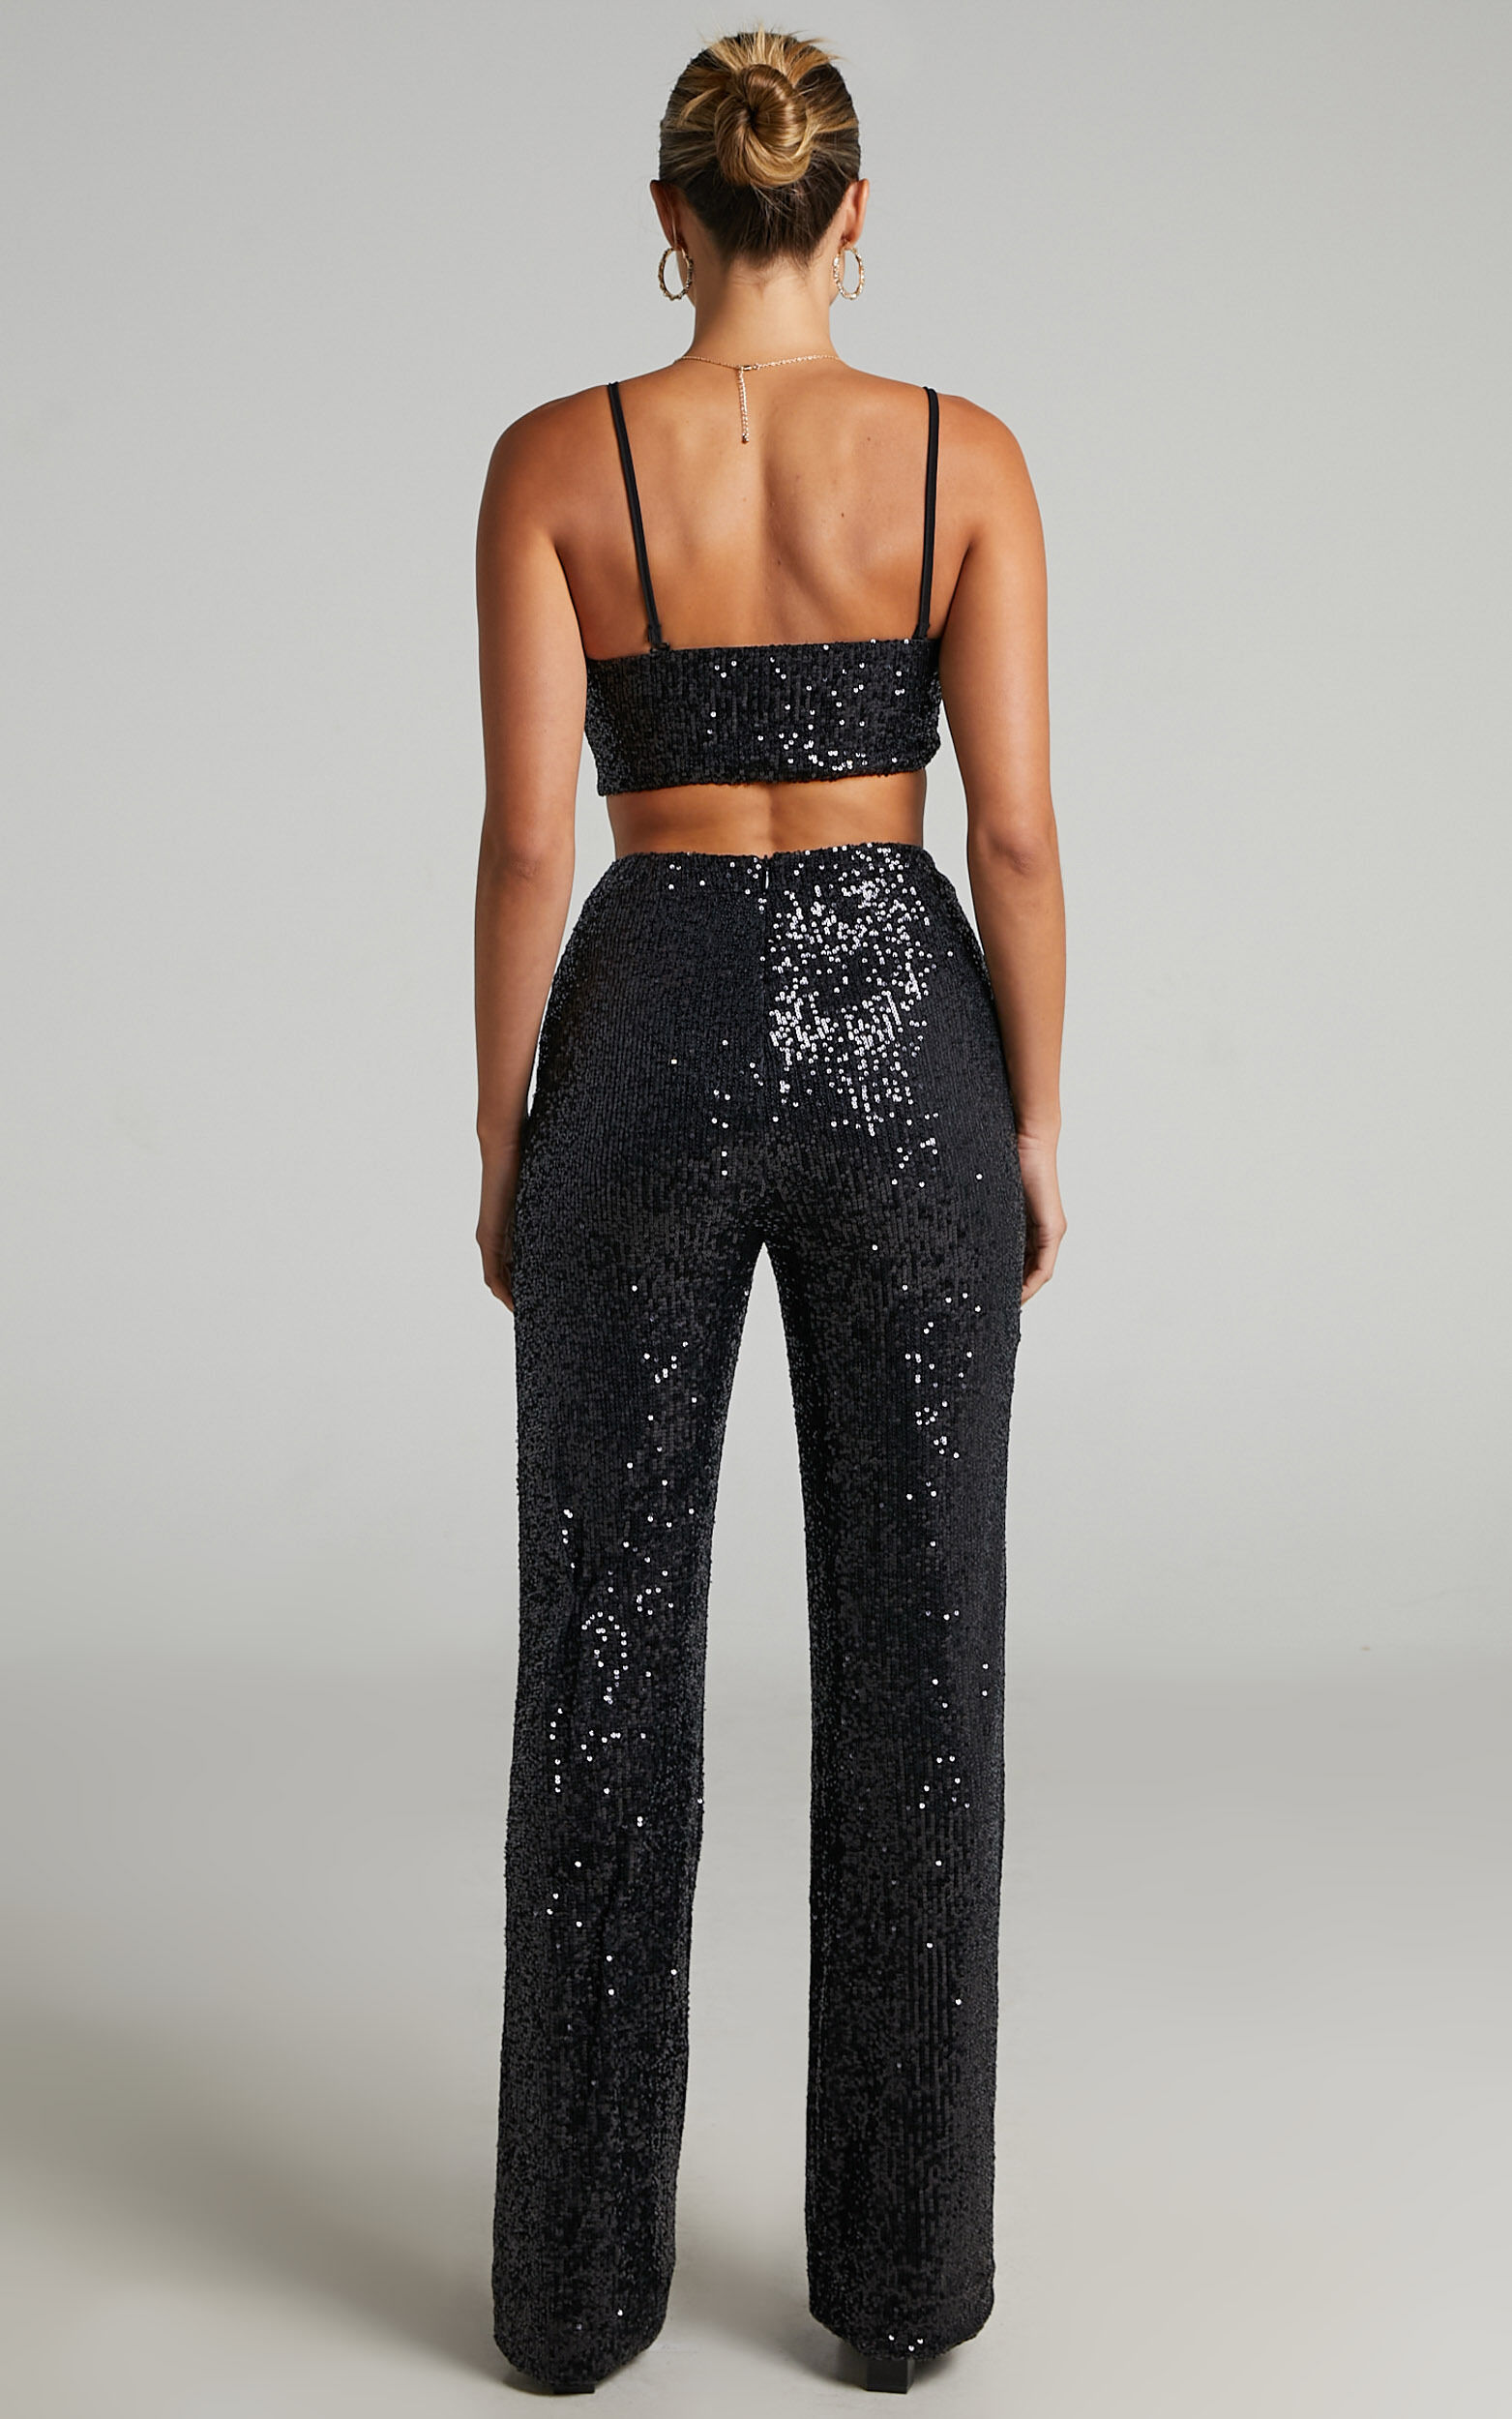 Imogen Two Piece Set - Bandeau Top and Straight Pants Set in Black Sequin